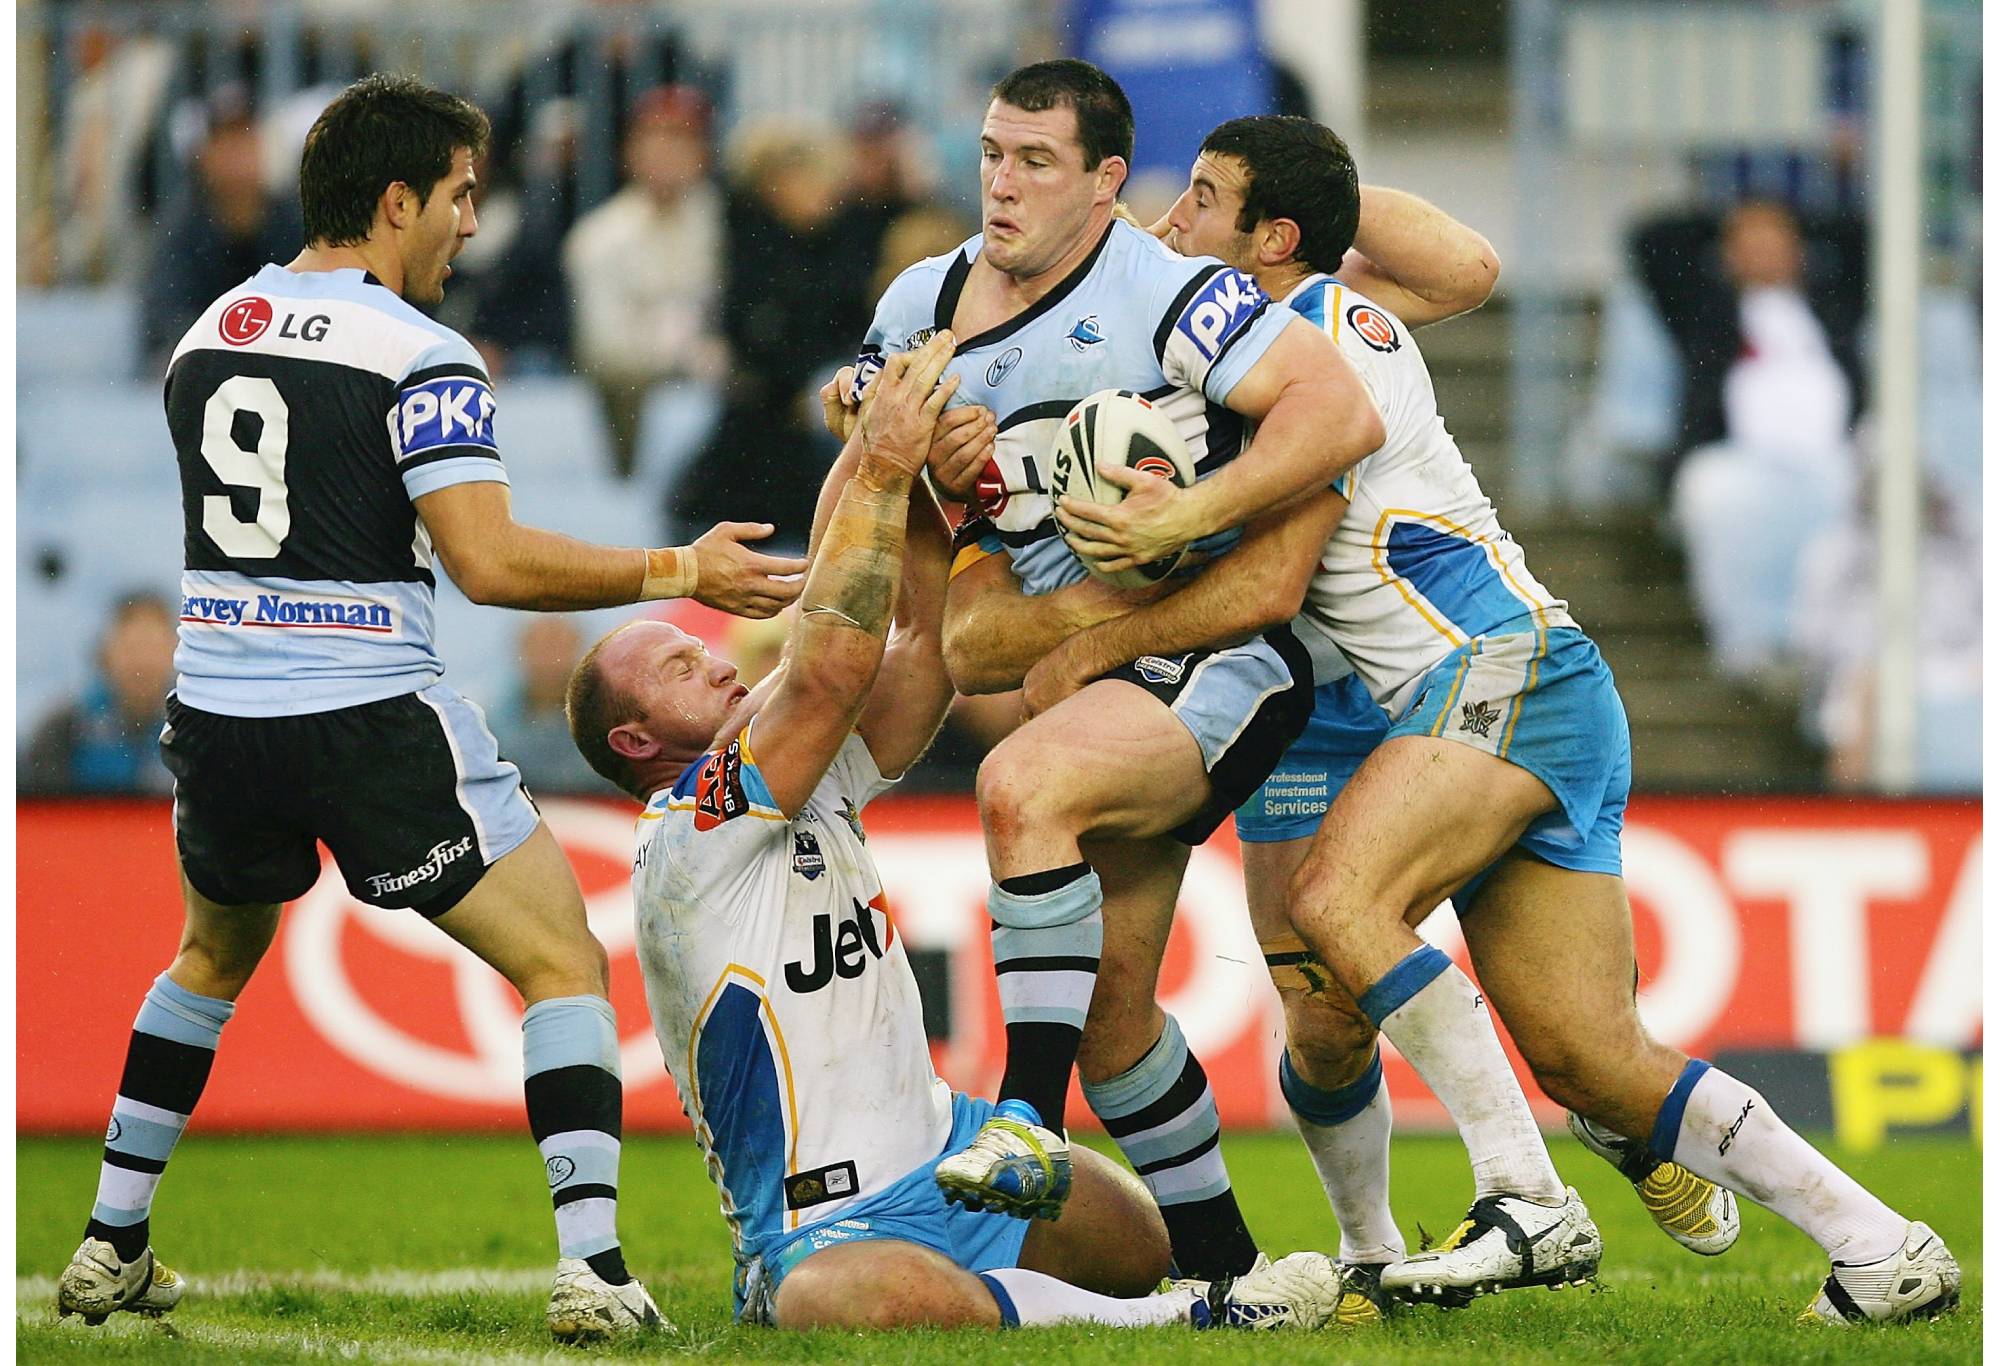 SYDNEY, AUSTRALIA - JUNE 01:  Paul Gallen of the Sharks takes on the Titans defence during the round 12 NRL match between the Cronulla Sharks and the Gold Coast Titans at Toyota Stadium on June 1, 2008 in Sydney, Australia.  (Photo by Matt King/Getty Images)